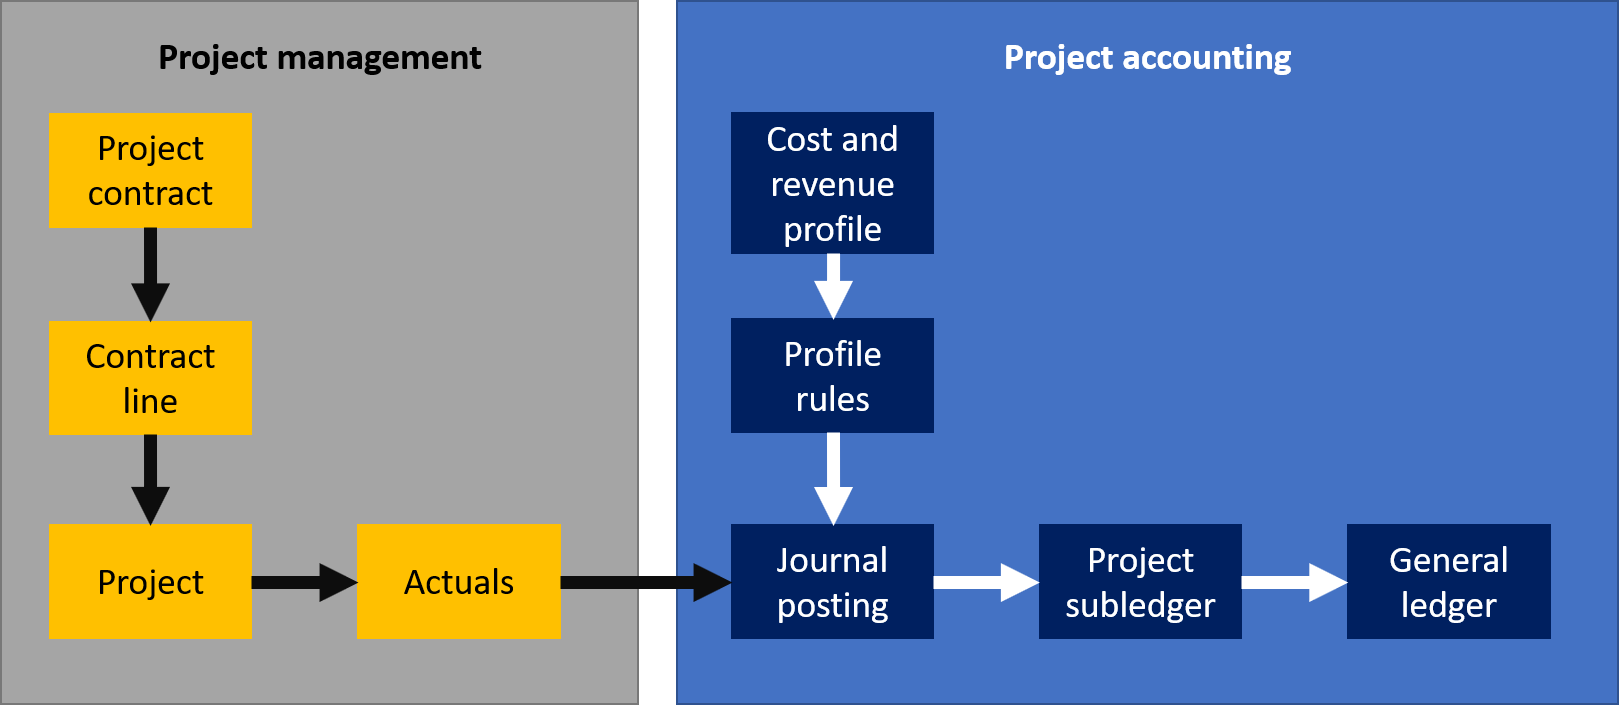  Diagram showing the integration of project management and project accounting.